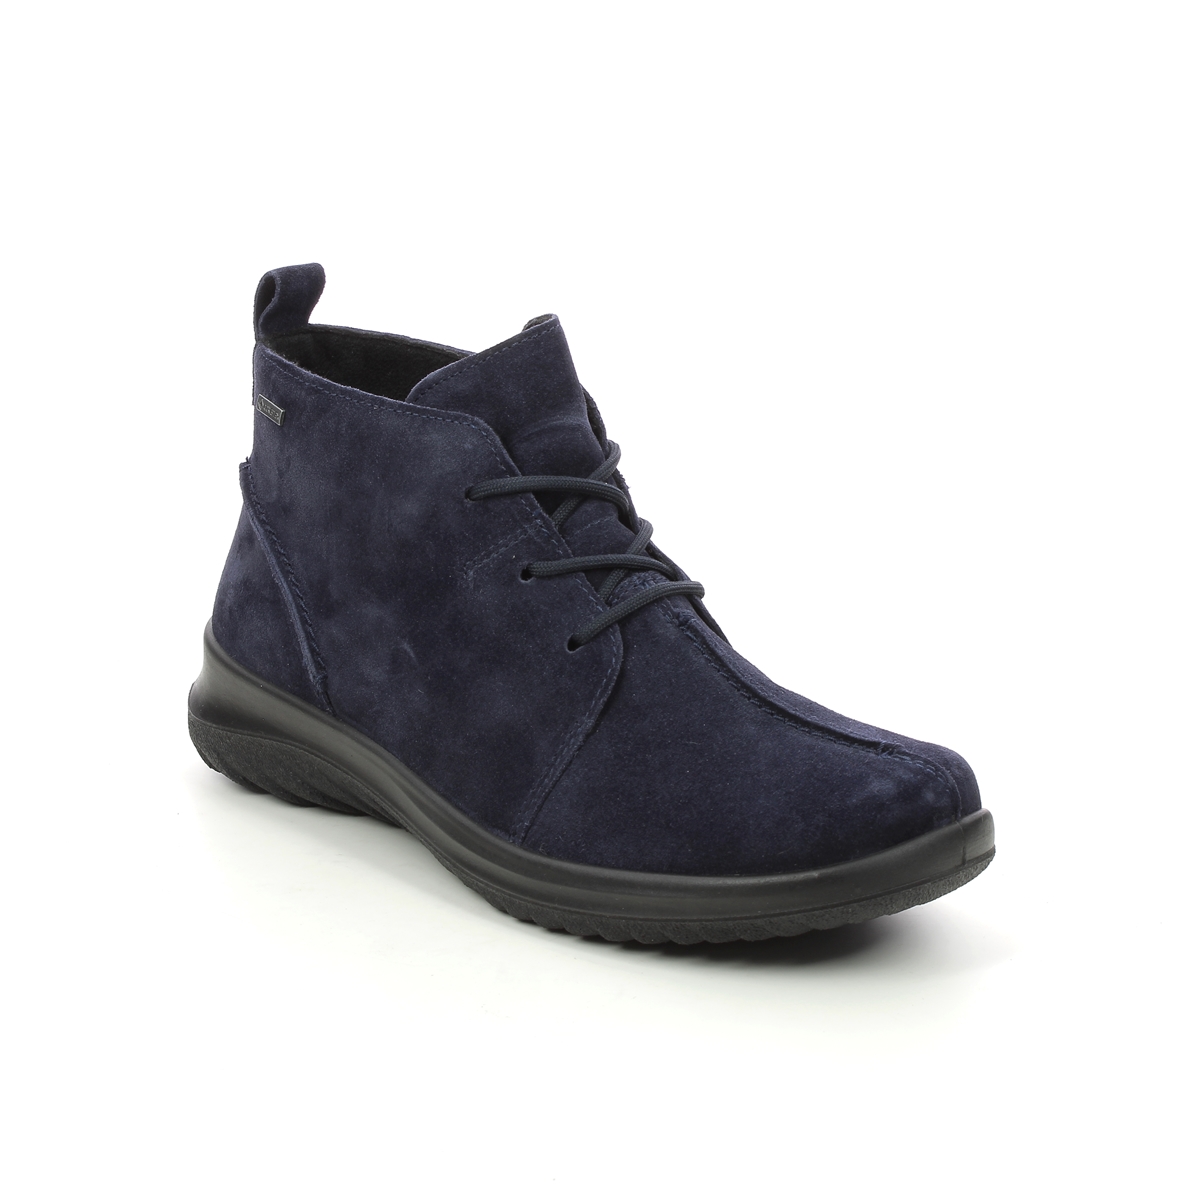 Legero Soft Lace Gtx Navy Suede Womens Lace Up Boots 2009569-8300 In Size 6 In Plain Navy Suede